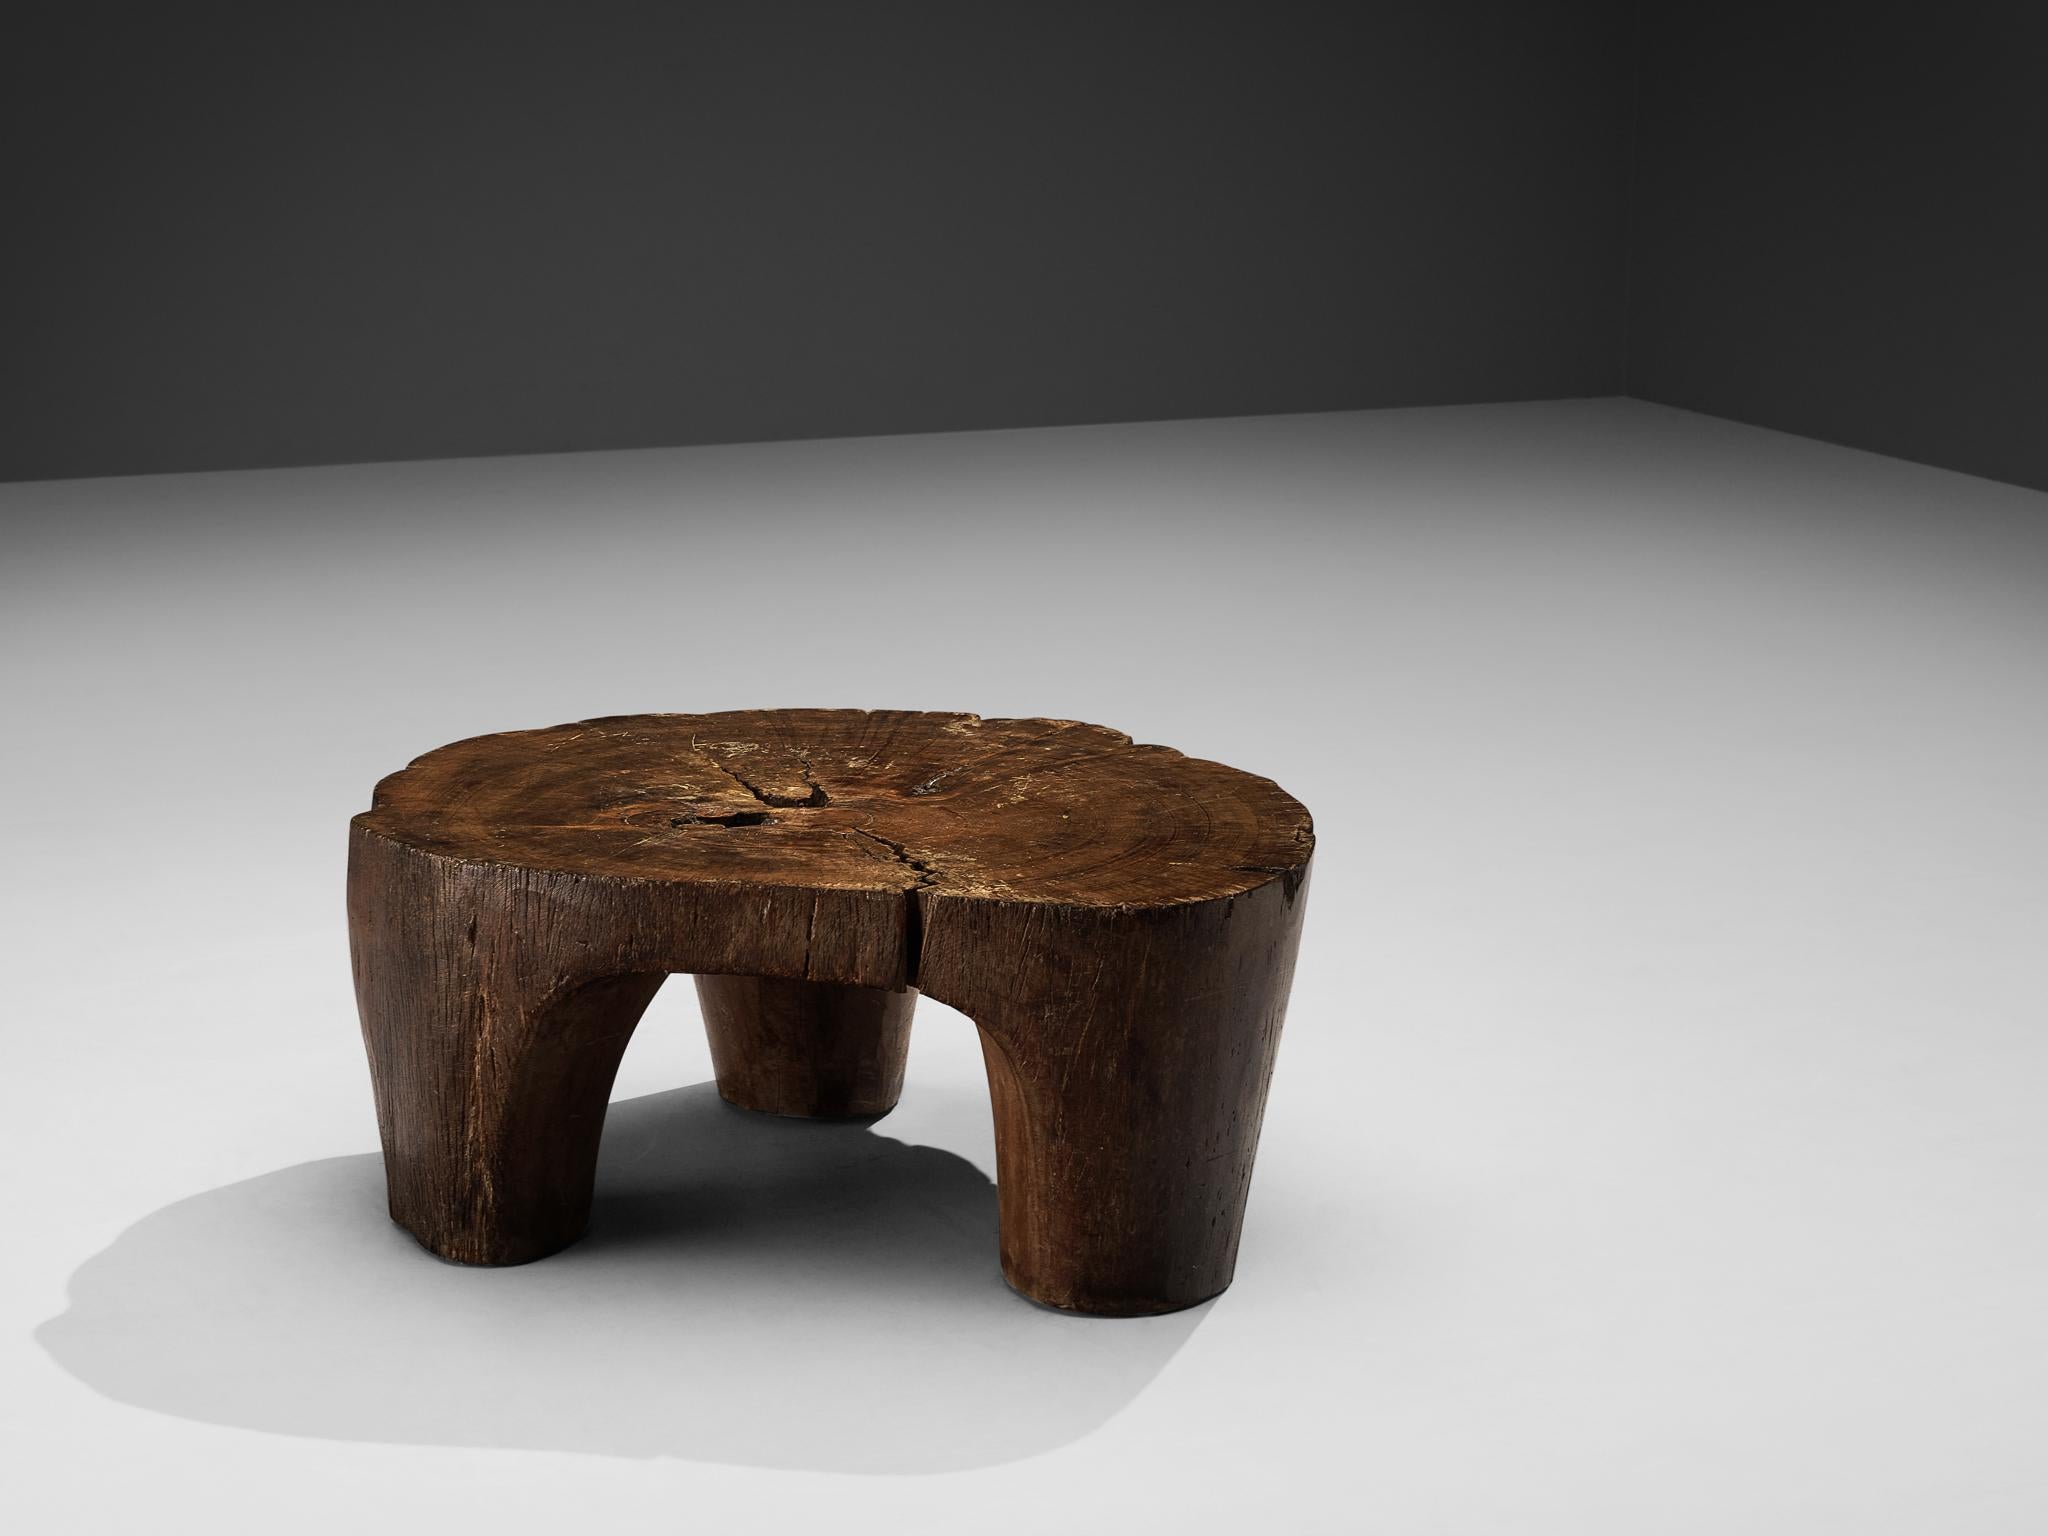 José Zanine Caldas, coffee table, Brazilian hardwood (pequi), Brazil, 1970s

This exceptional hand carved coffee table embodies everything that José Zanine Caldas stood for: love of nature and especially wood. This table, created in the 1970s, is